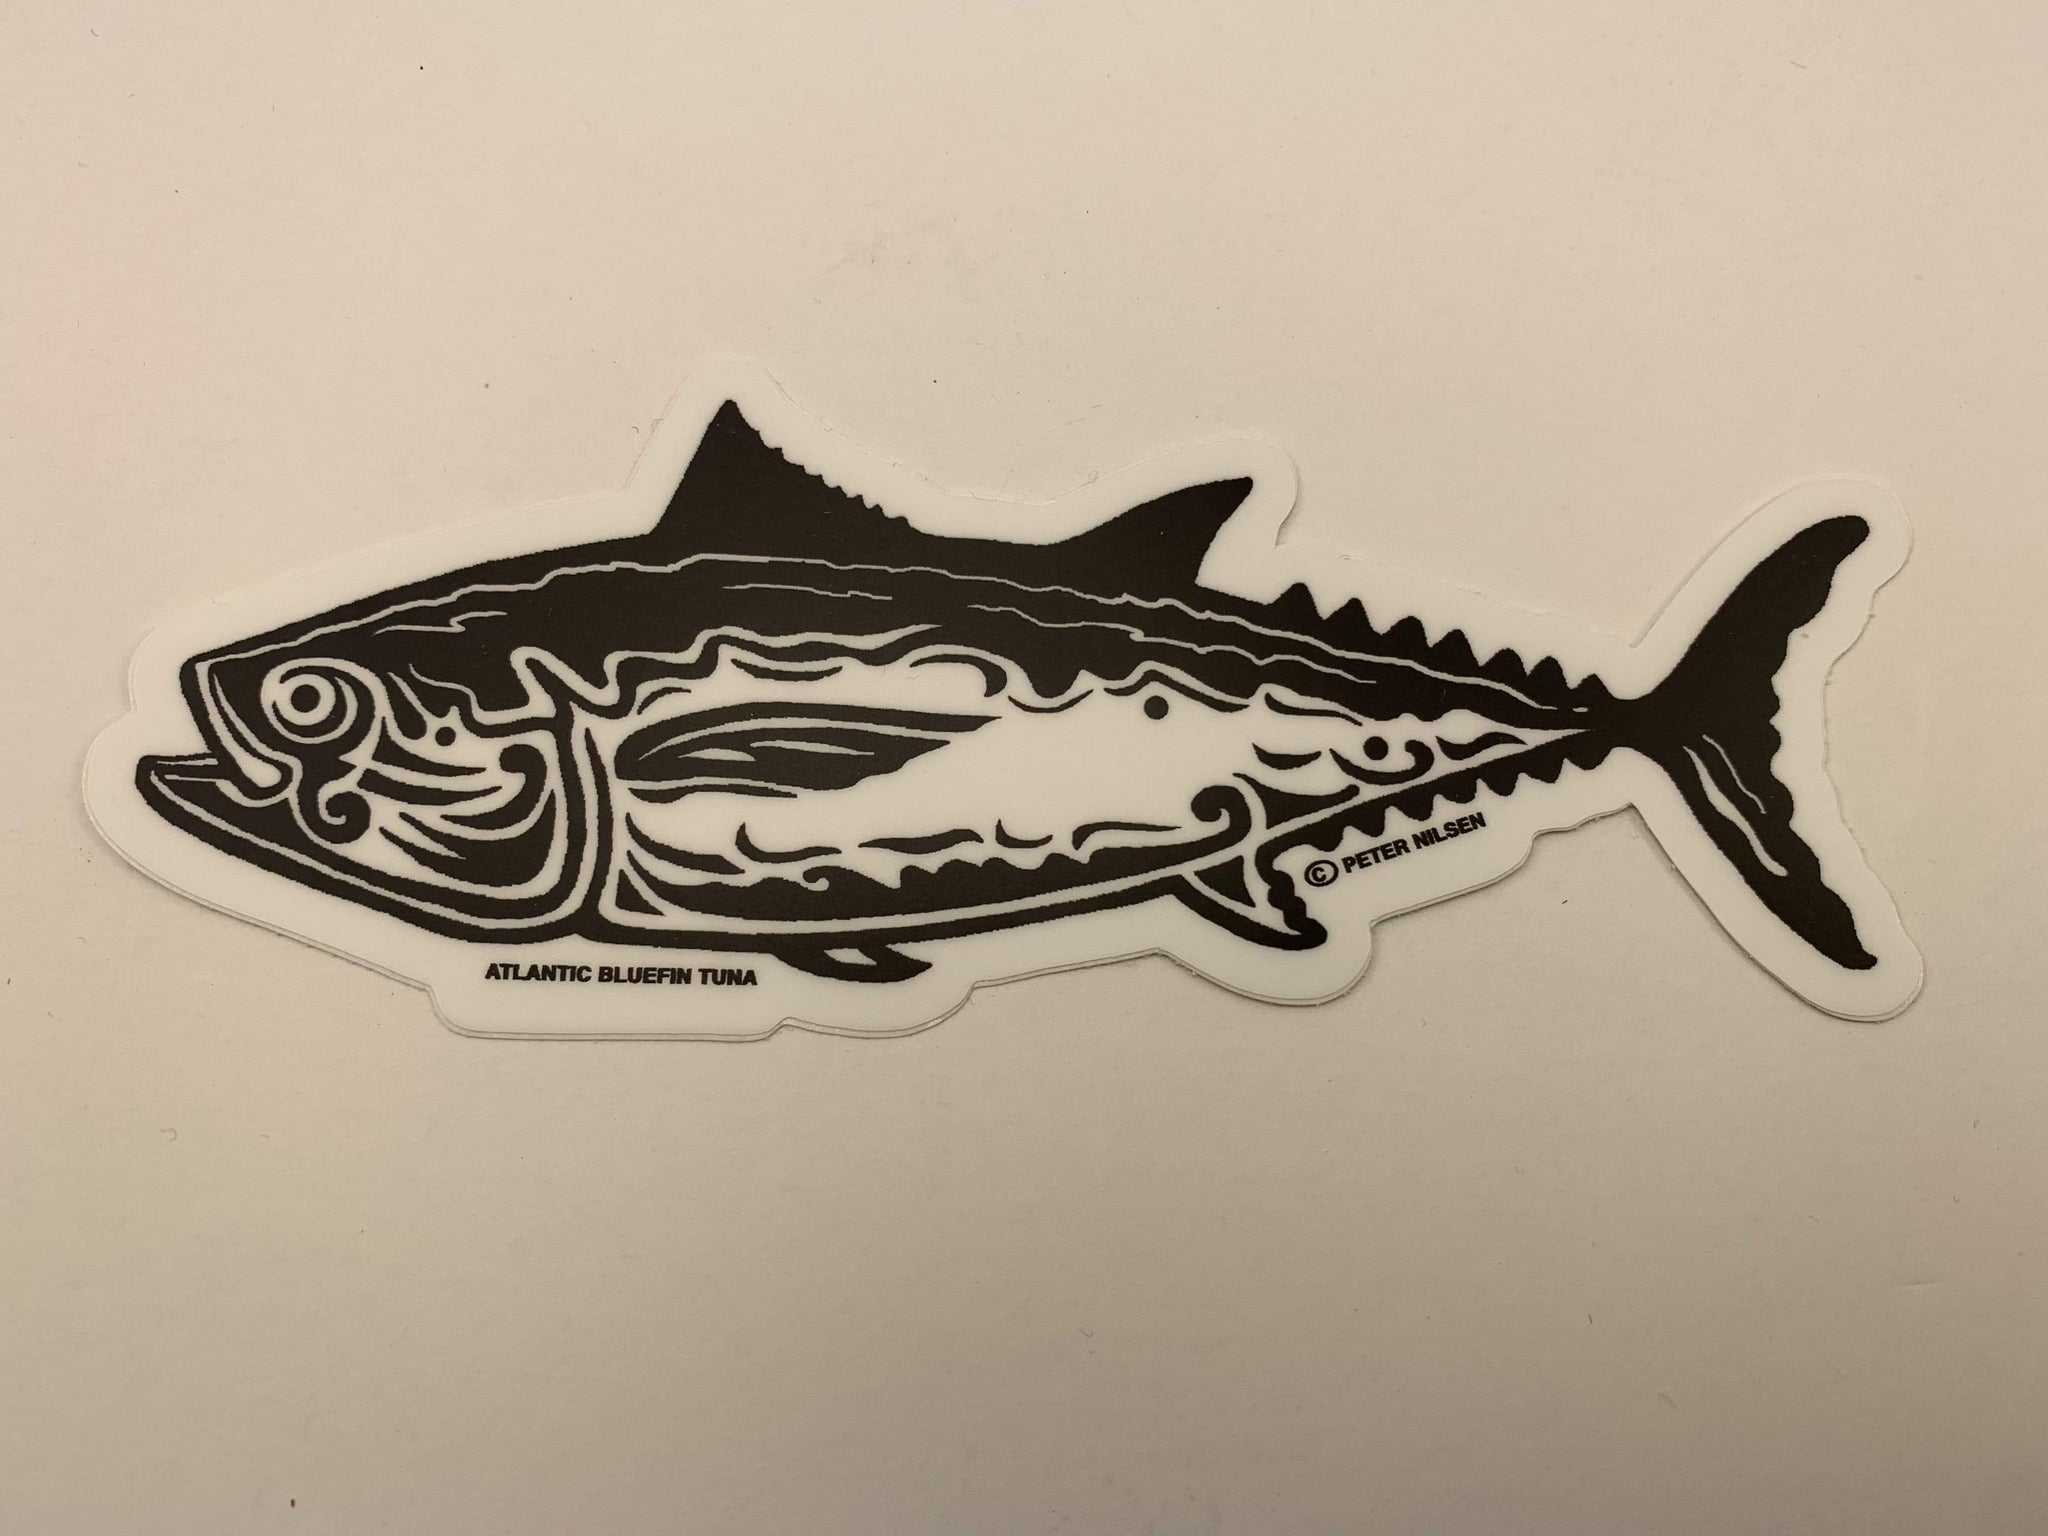 Buy Bluefin Tuna Sticker Saltwater Fishing Decal for Boat Cars